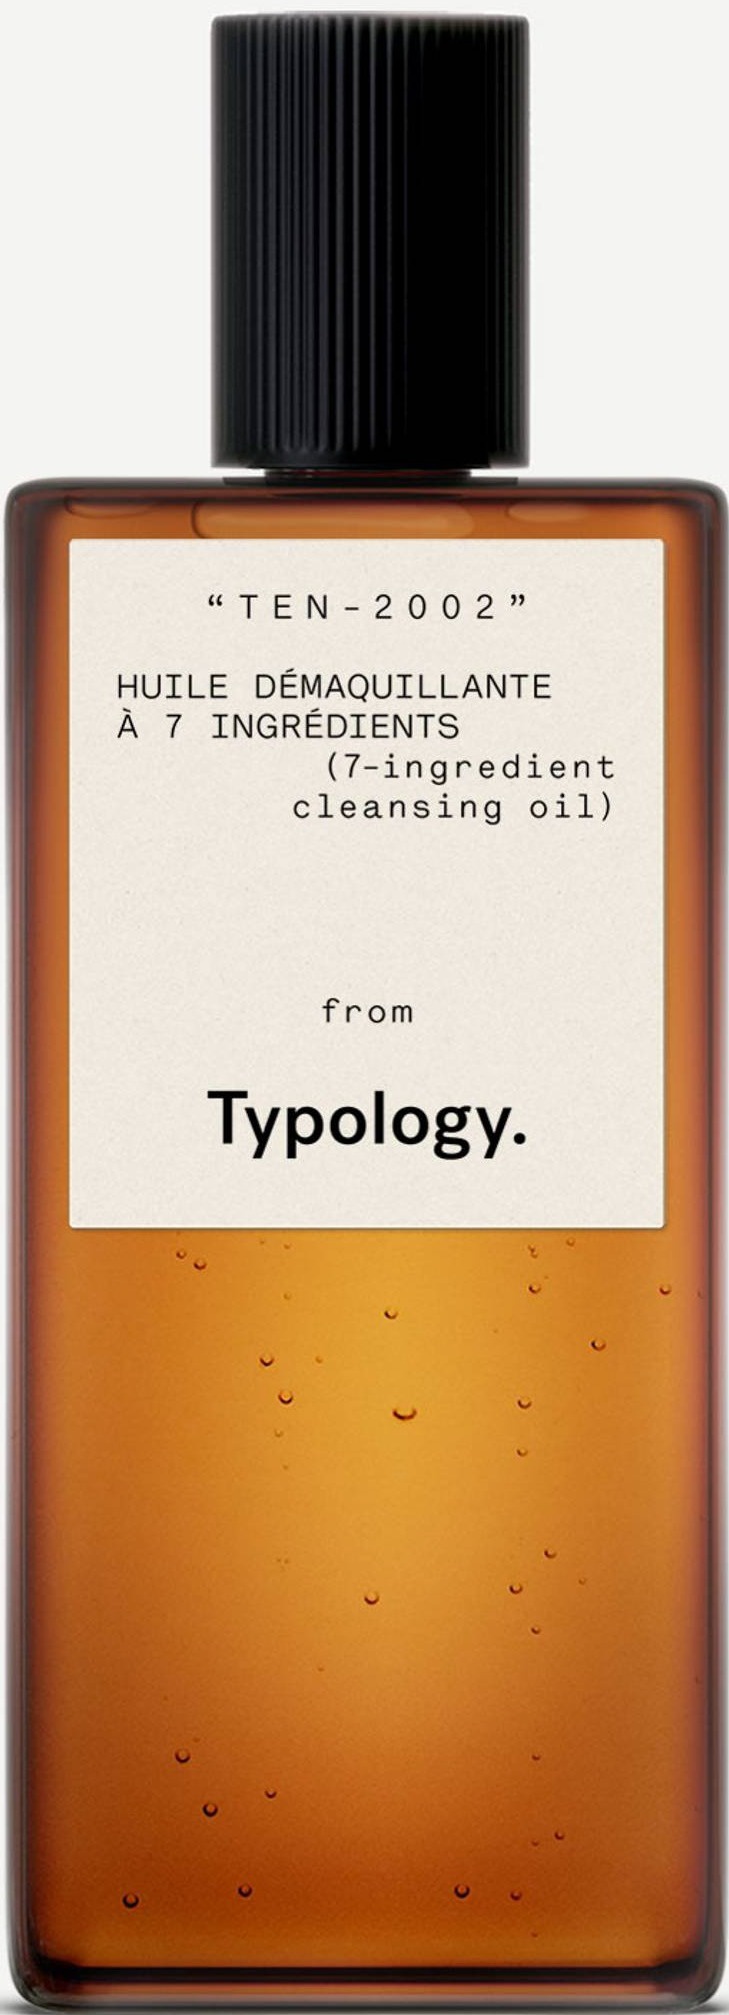 Typology 7-ingredient Cleansing Oil ingredients (Explained)